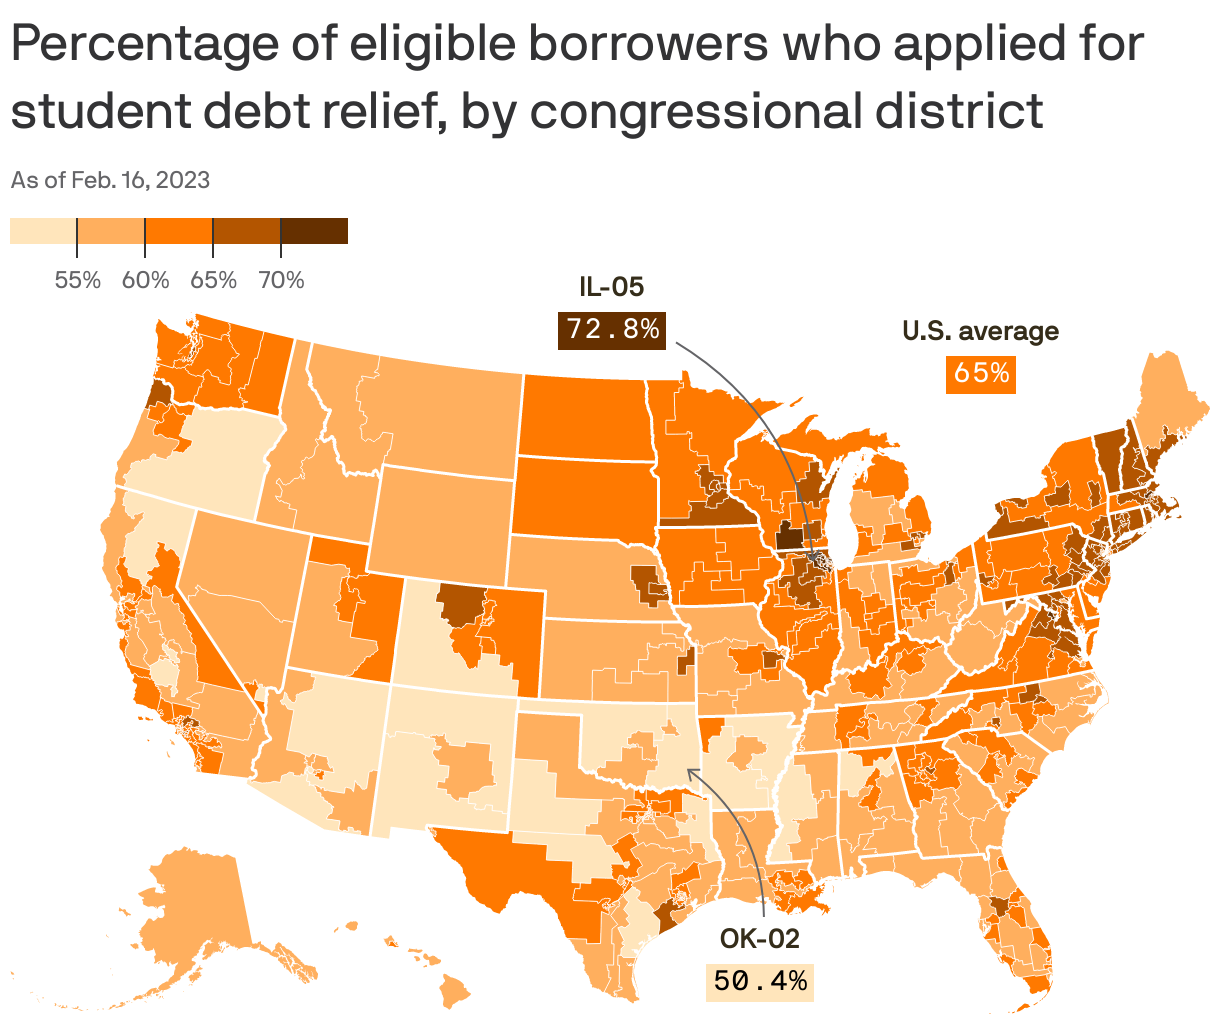 Percentage of eligible borrowers who applied for student debt relief, by congressional district